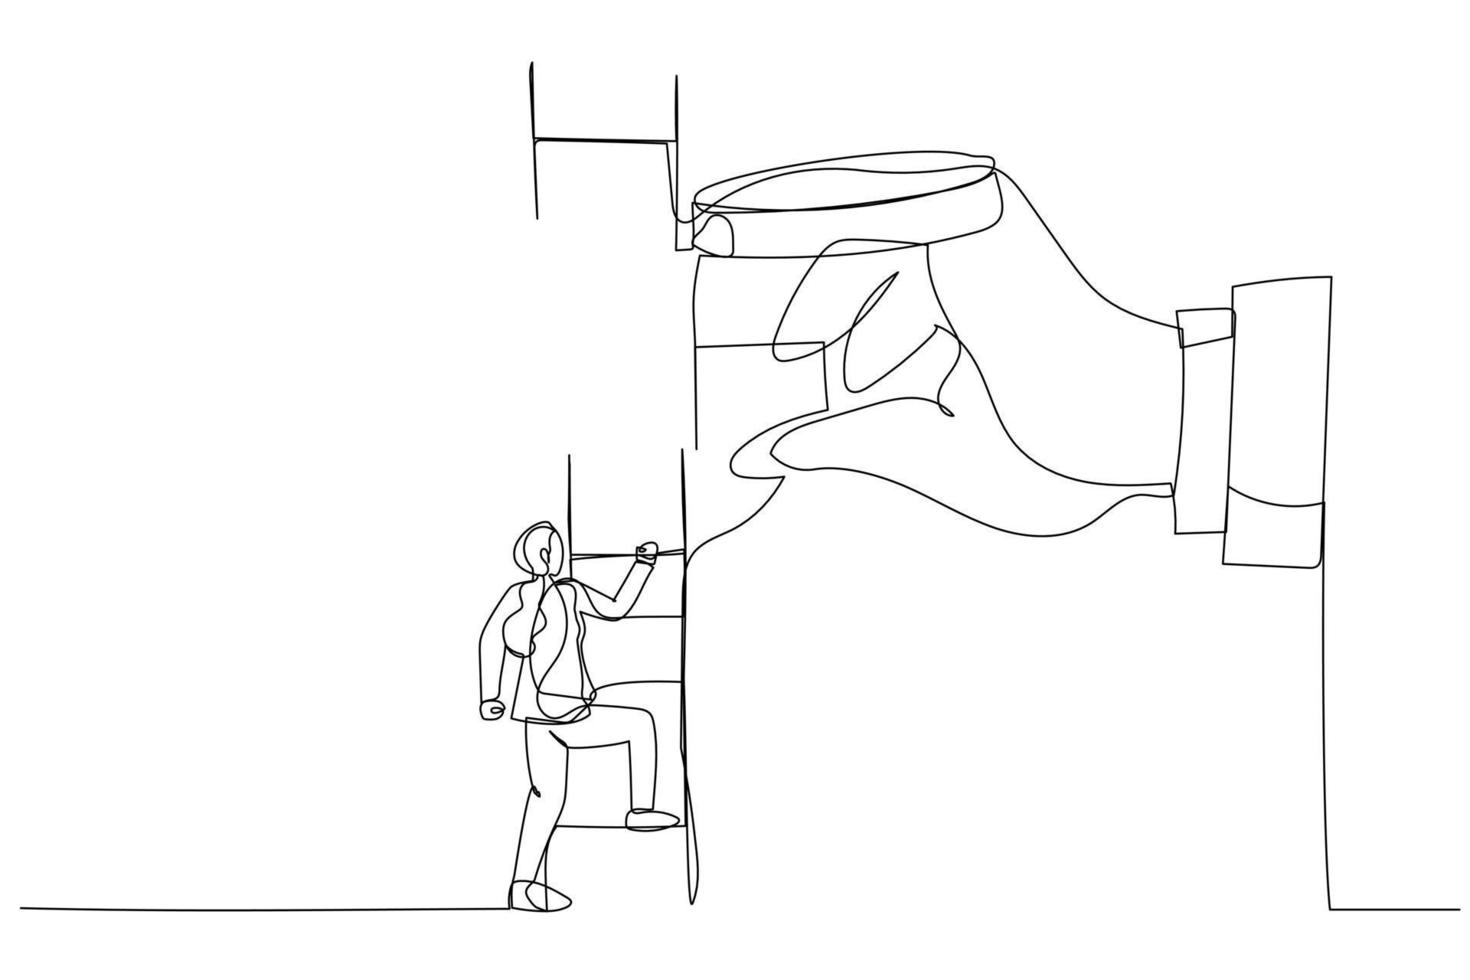 Illustration of businesswoman climbing up to top of broken ladder with huge helping hand to connect to reach higher. Single line art style vector